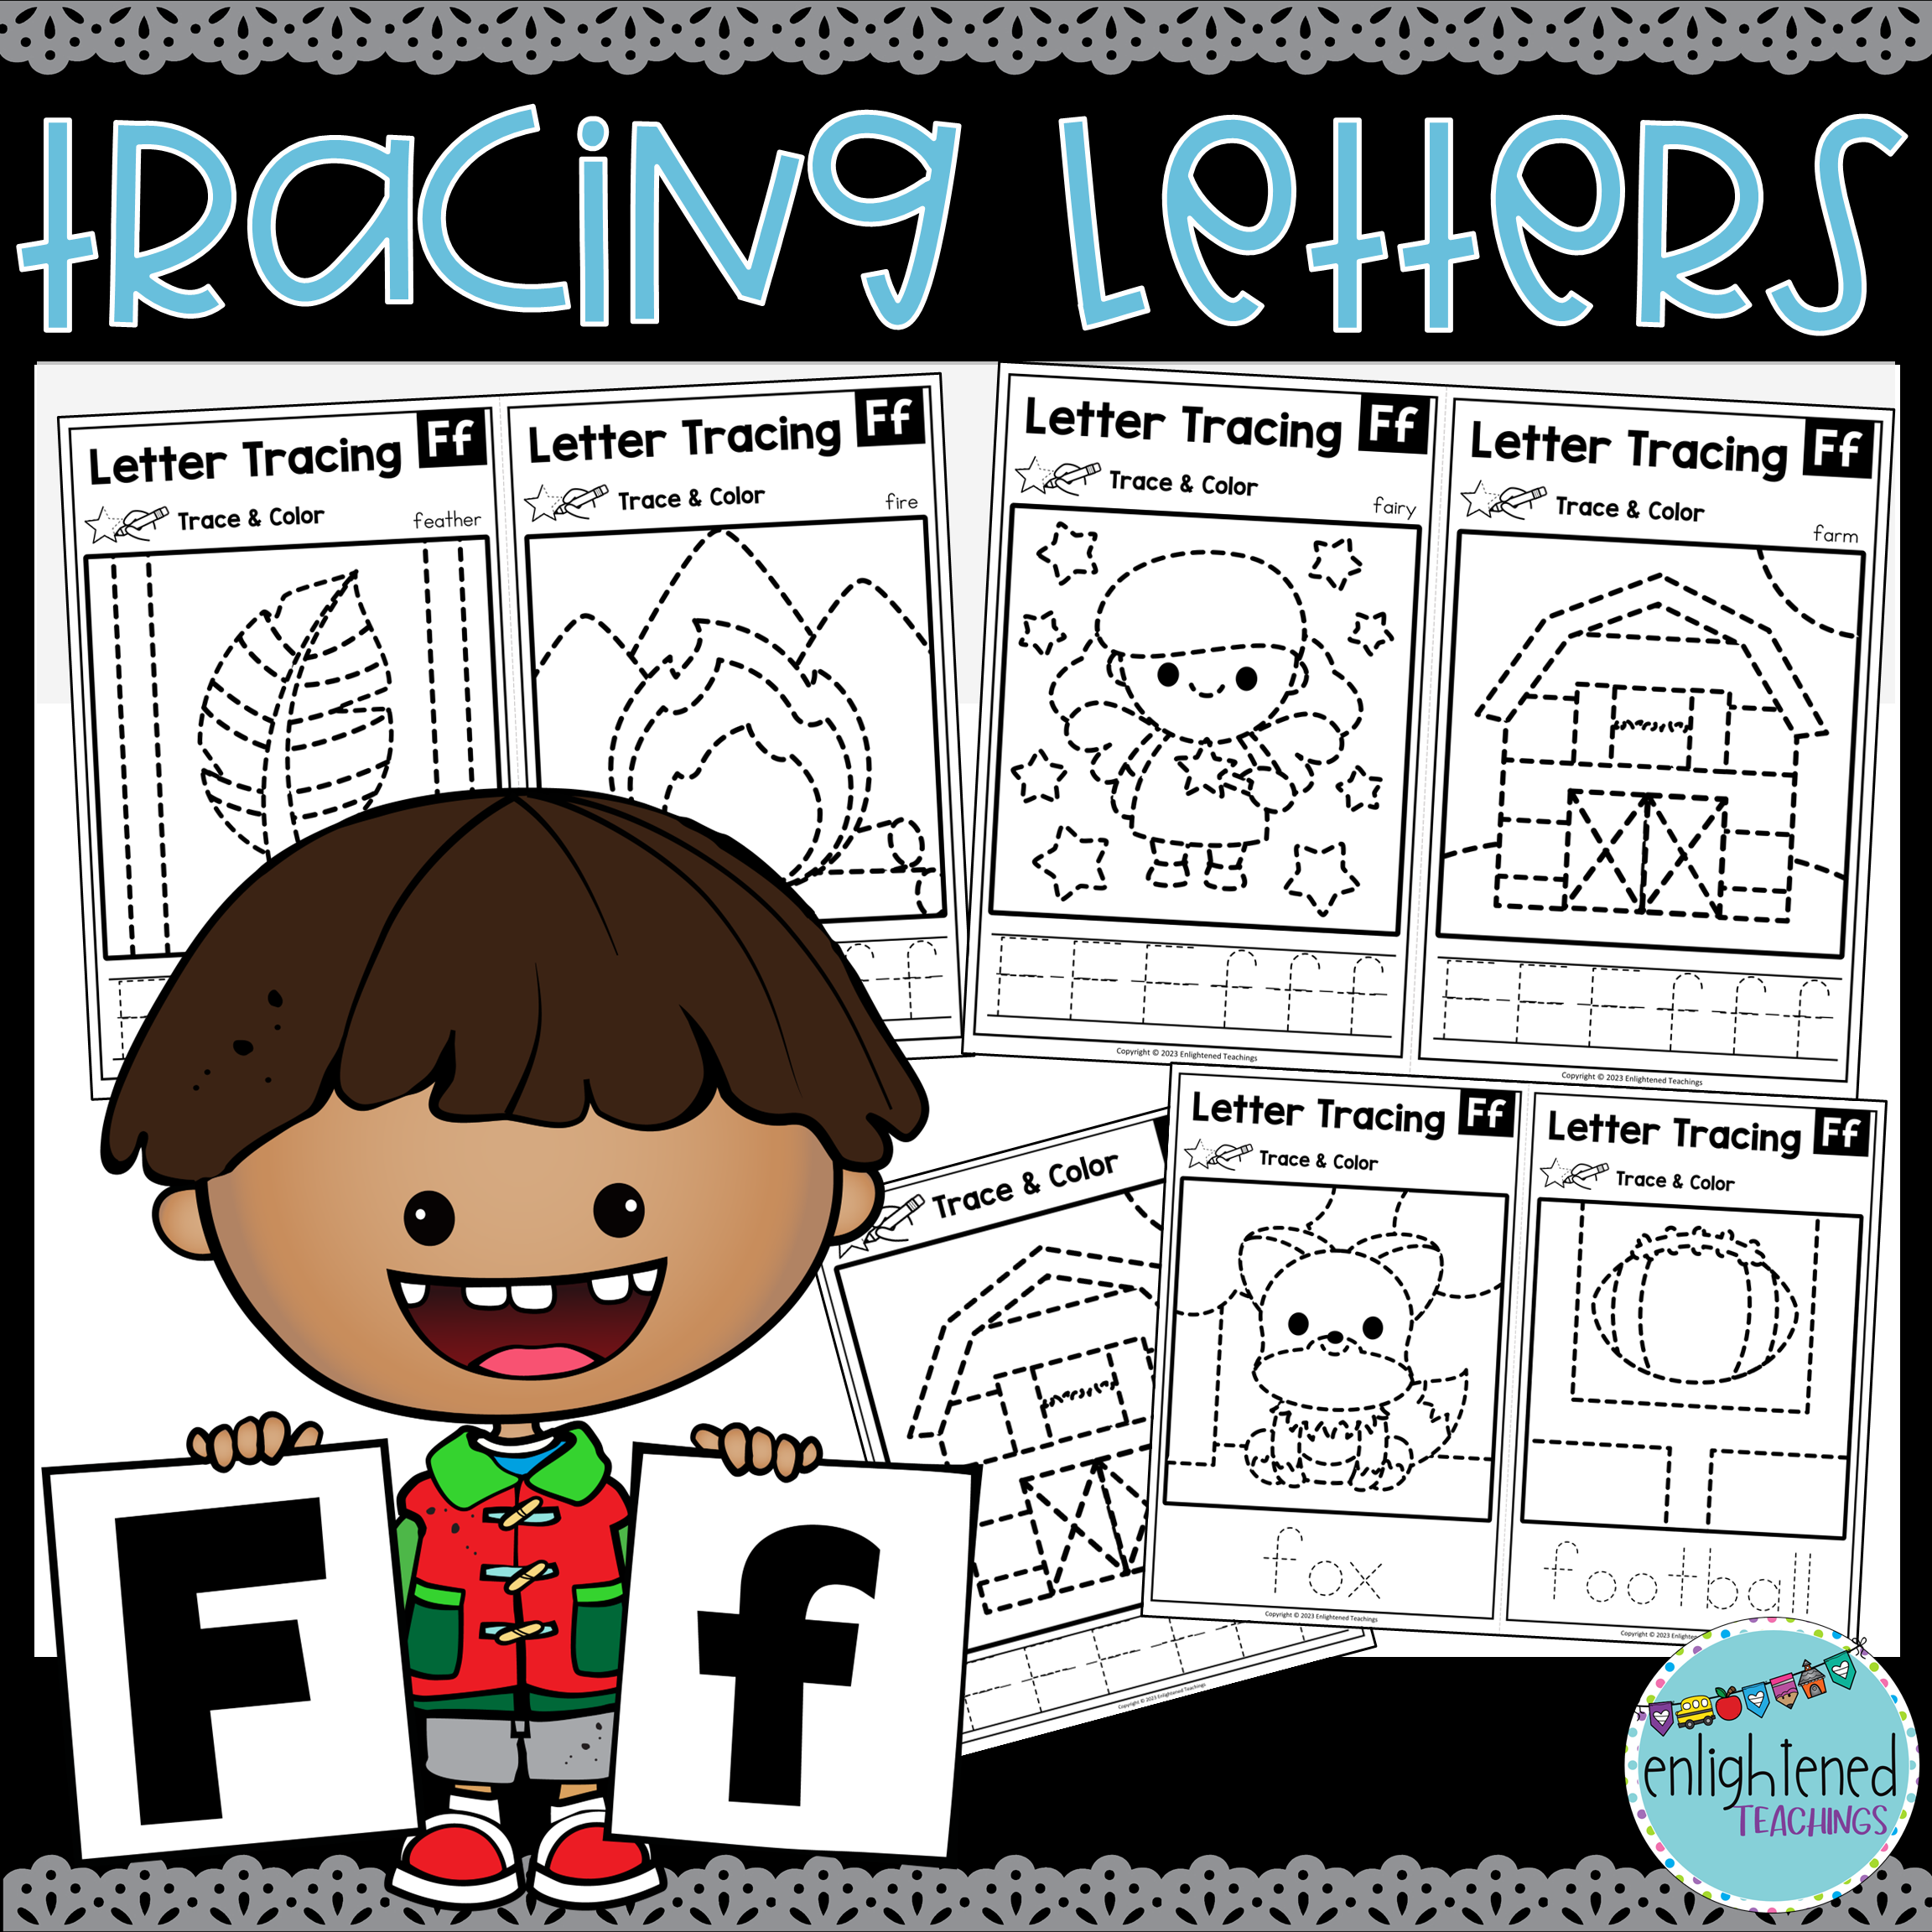 Letter f tracing worksheets letter tracing mats letter f trace color made by teachers